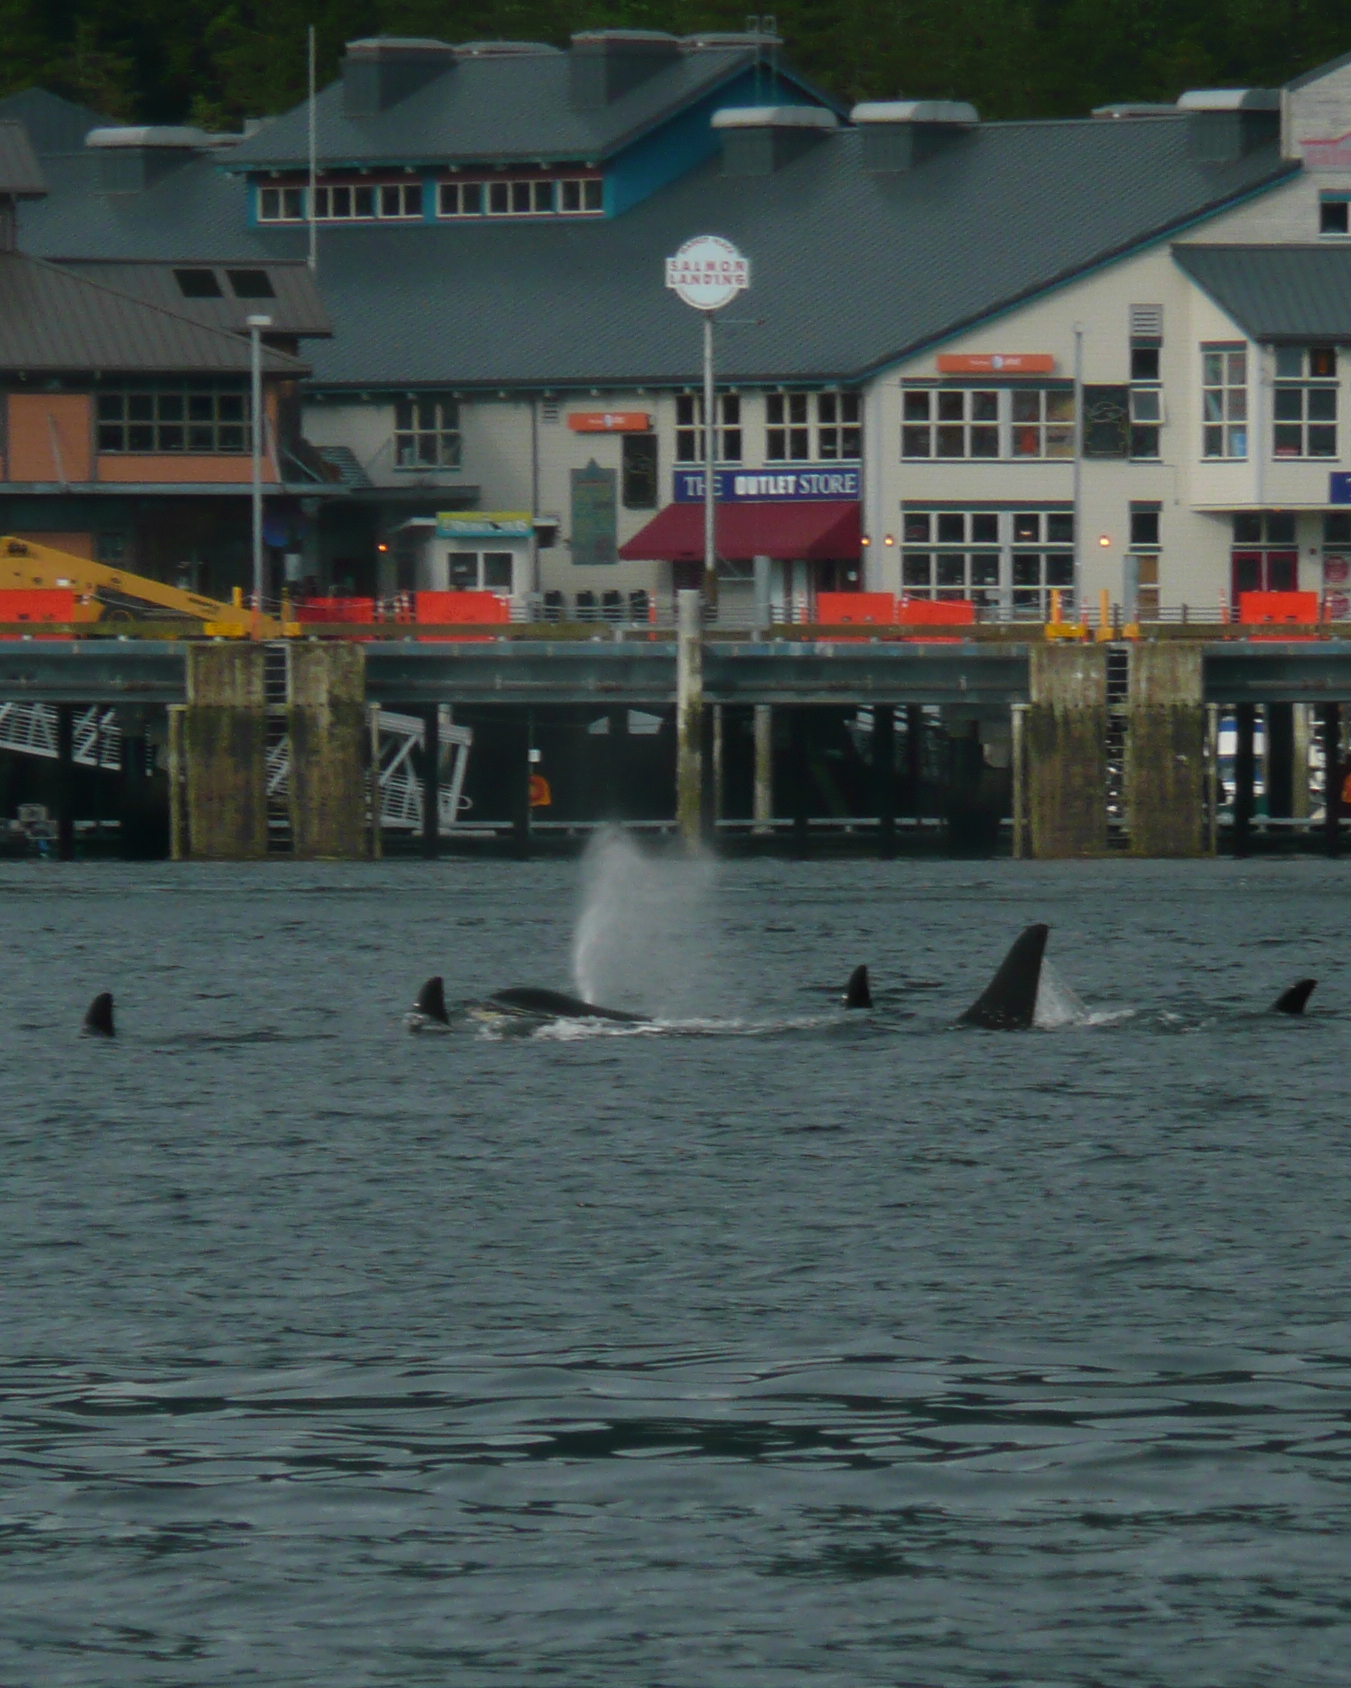  We never know when the orcas will visit. Resident pods of orcas are often seen right from the dock in downtwon Ketchikan.  